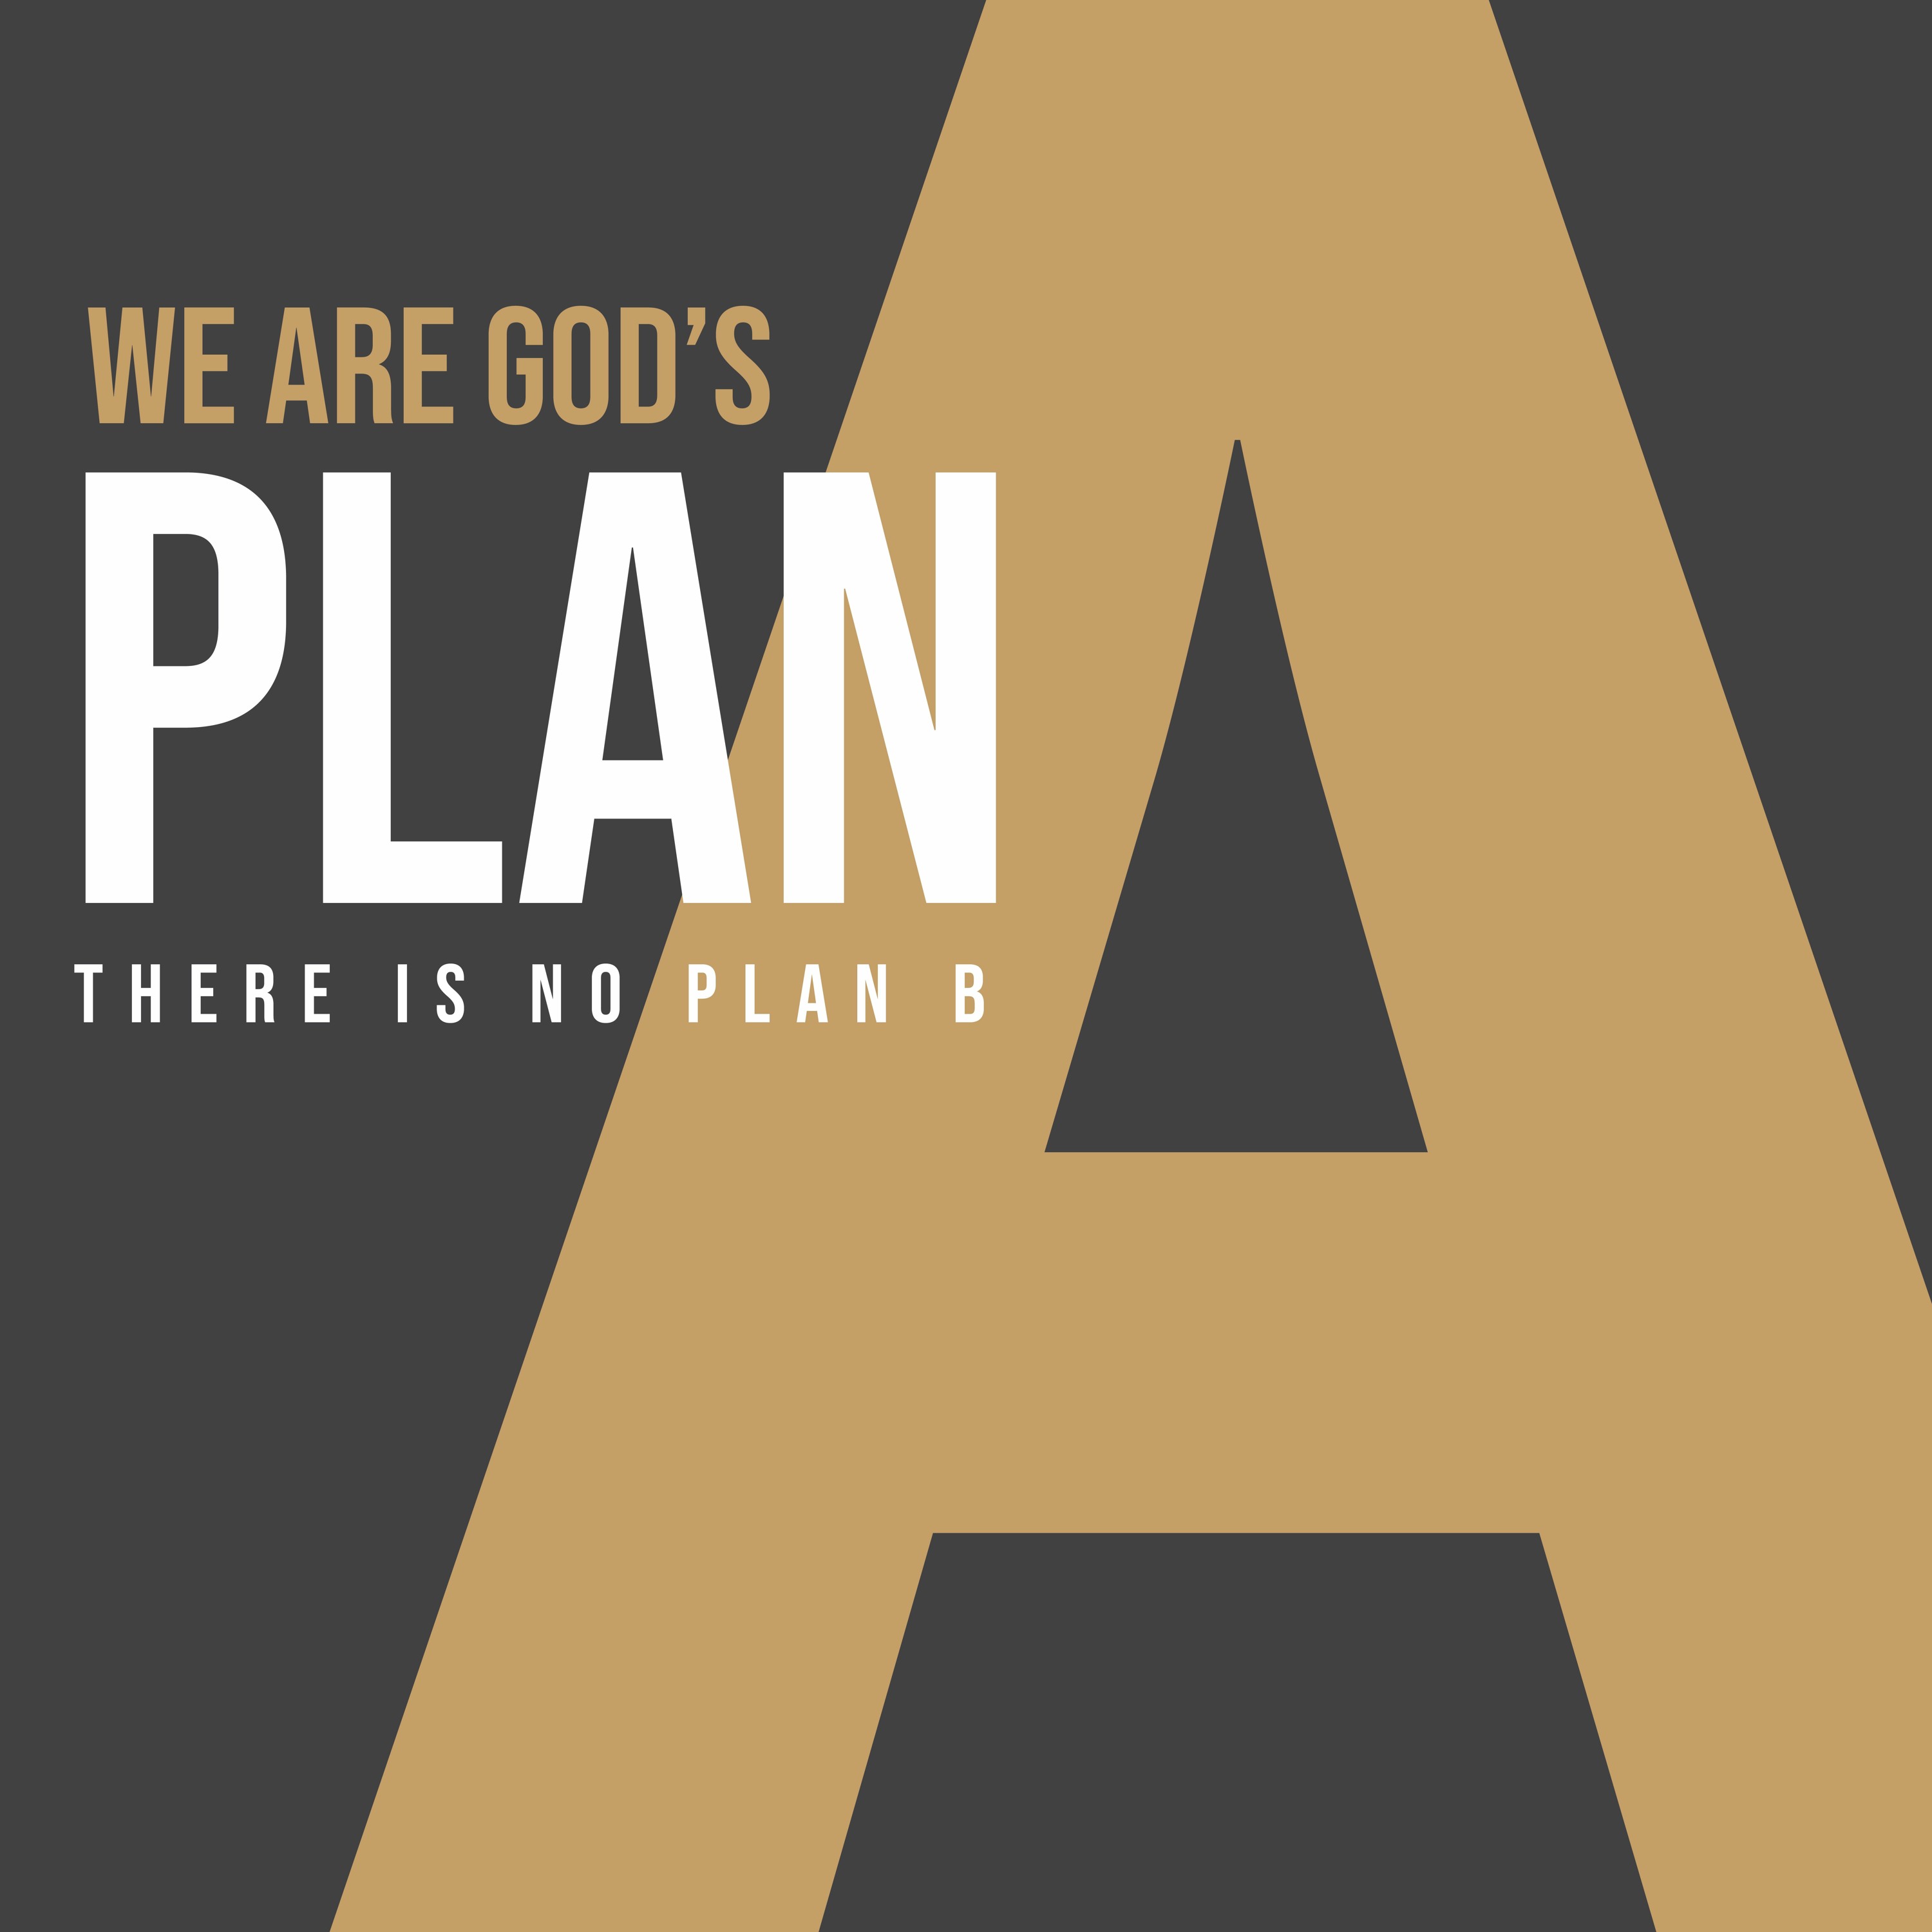 God’s Plan A to Address Racial Injustice | We Are God’s Plan A | Ethan Magness